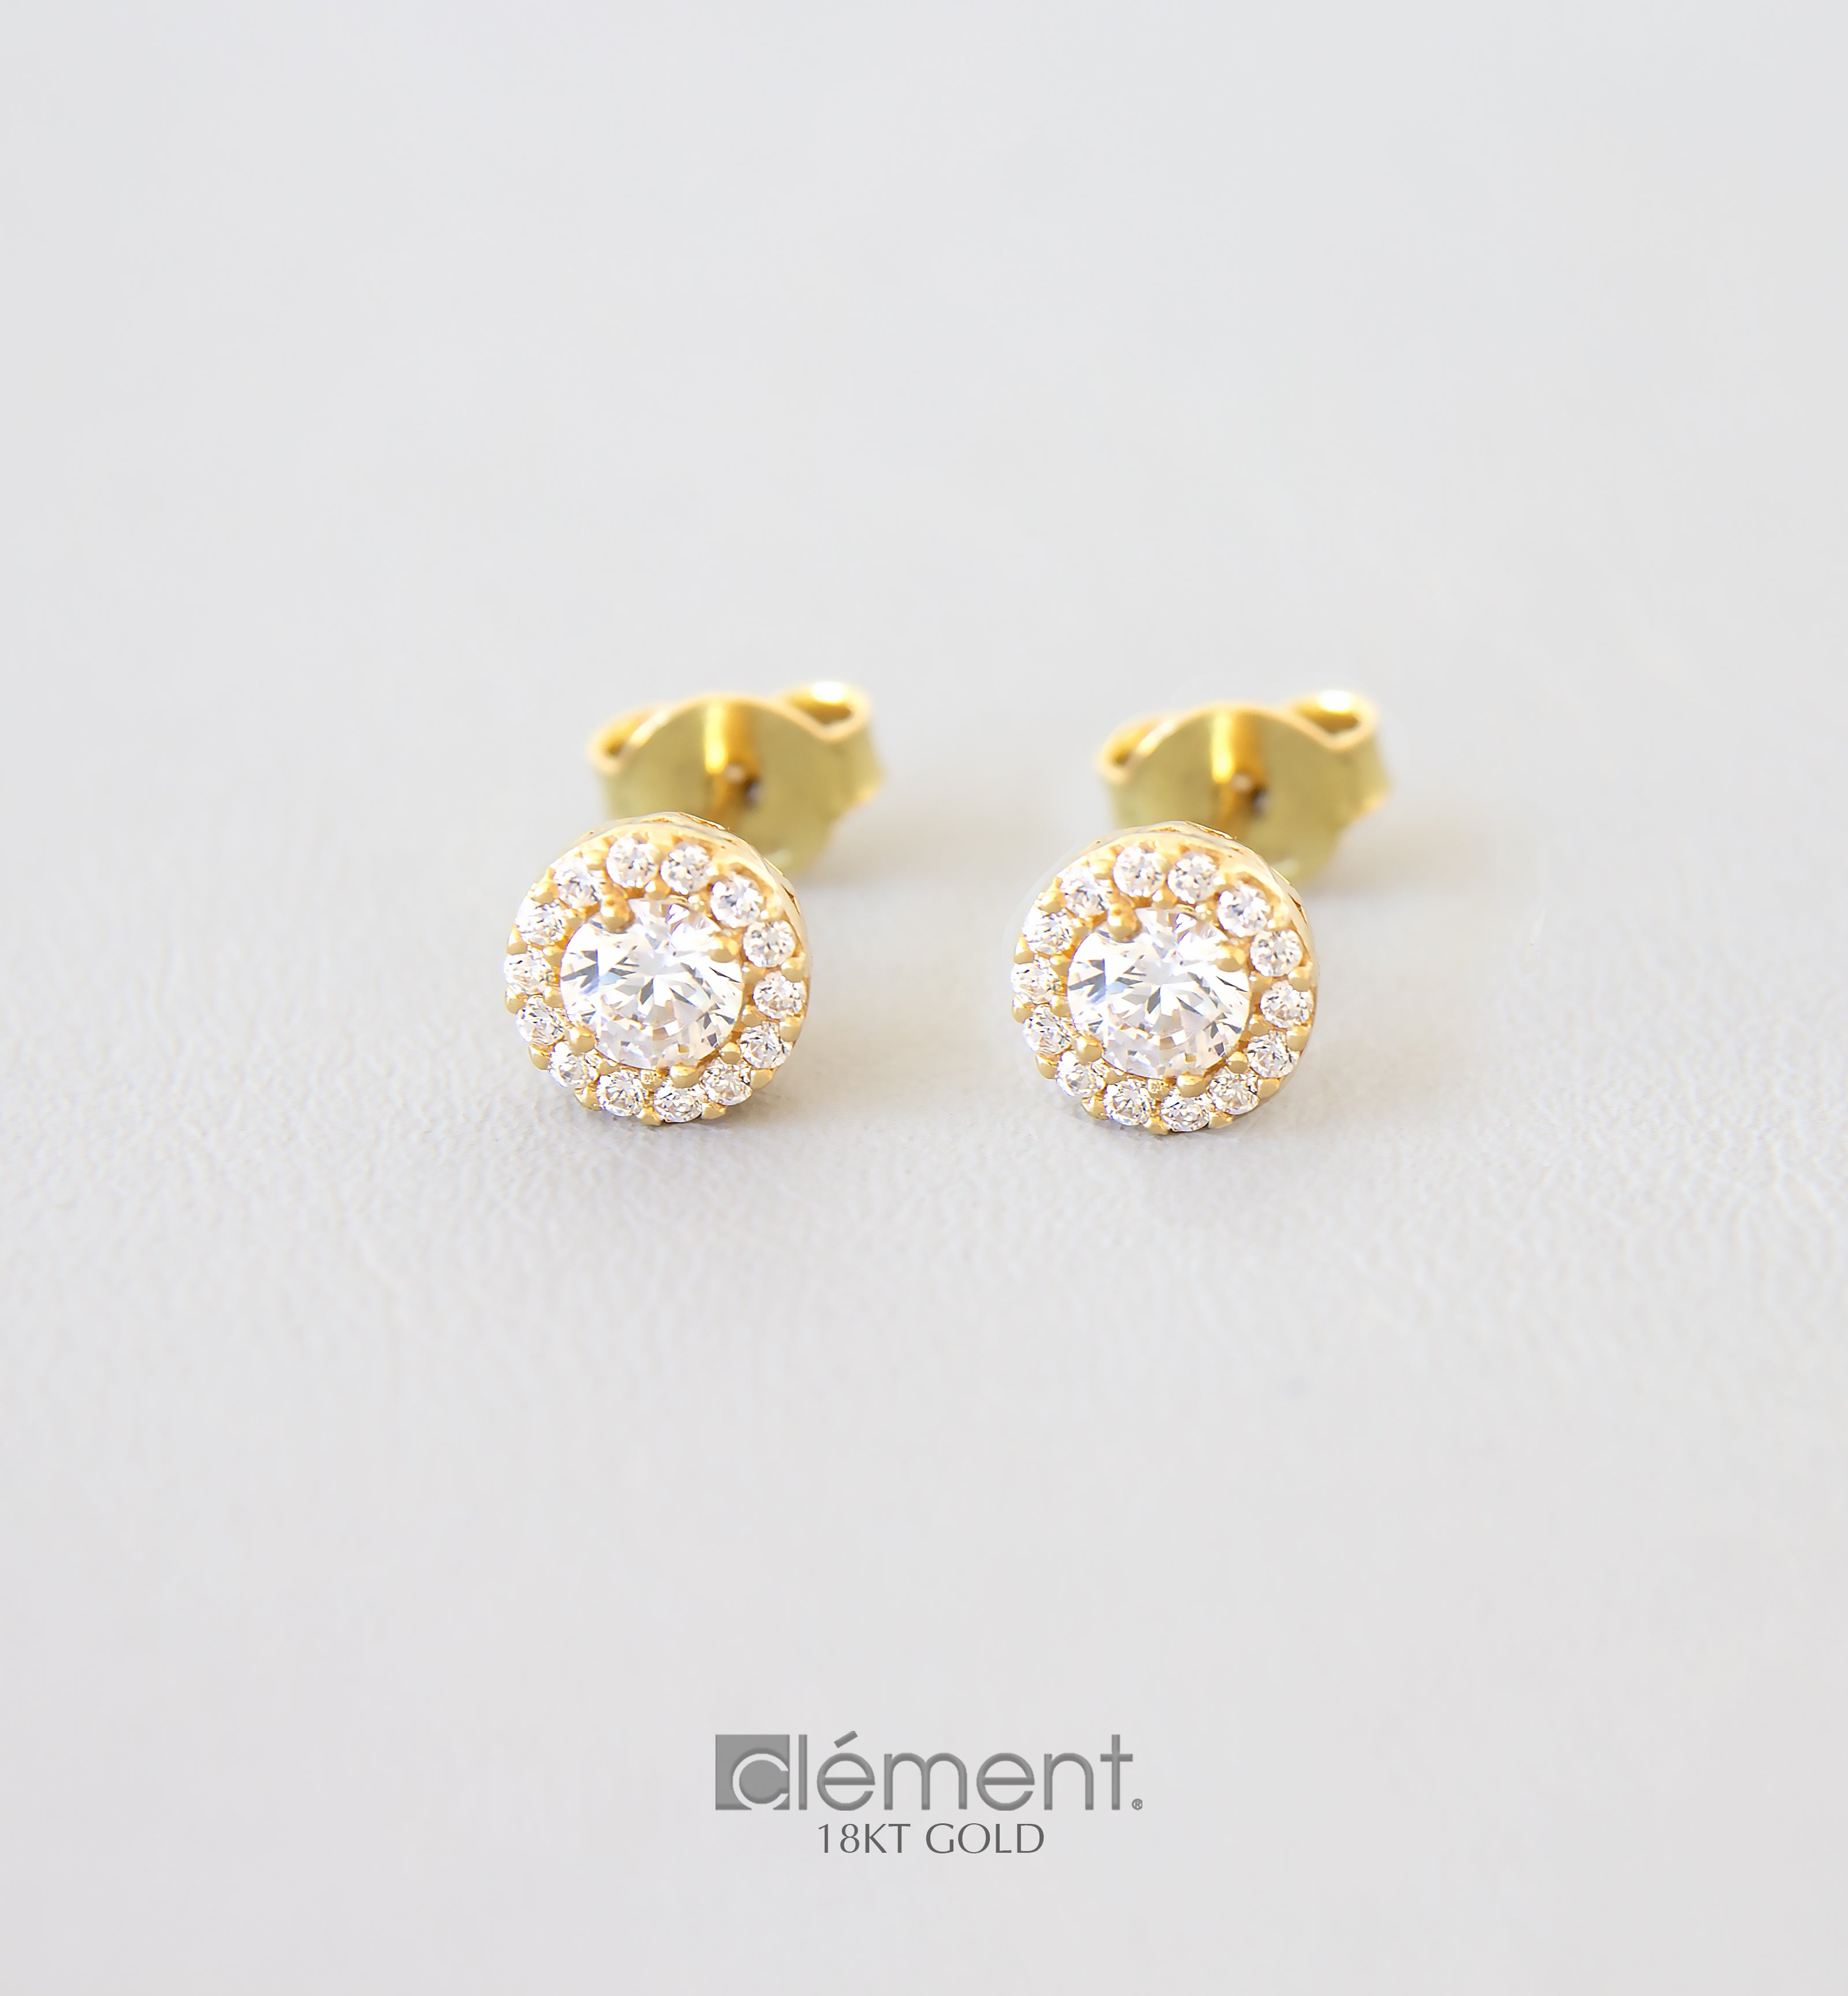 18ct Gold Earrings with Cubic Zircon Stones